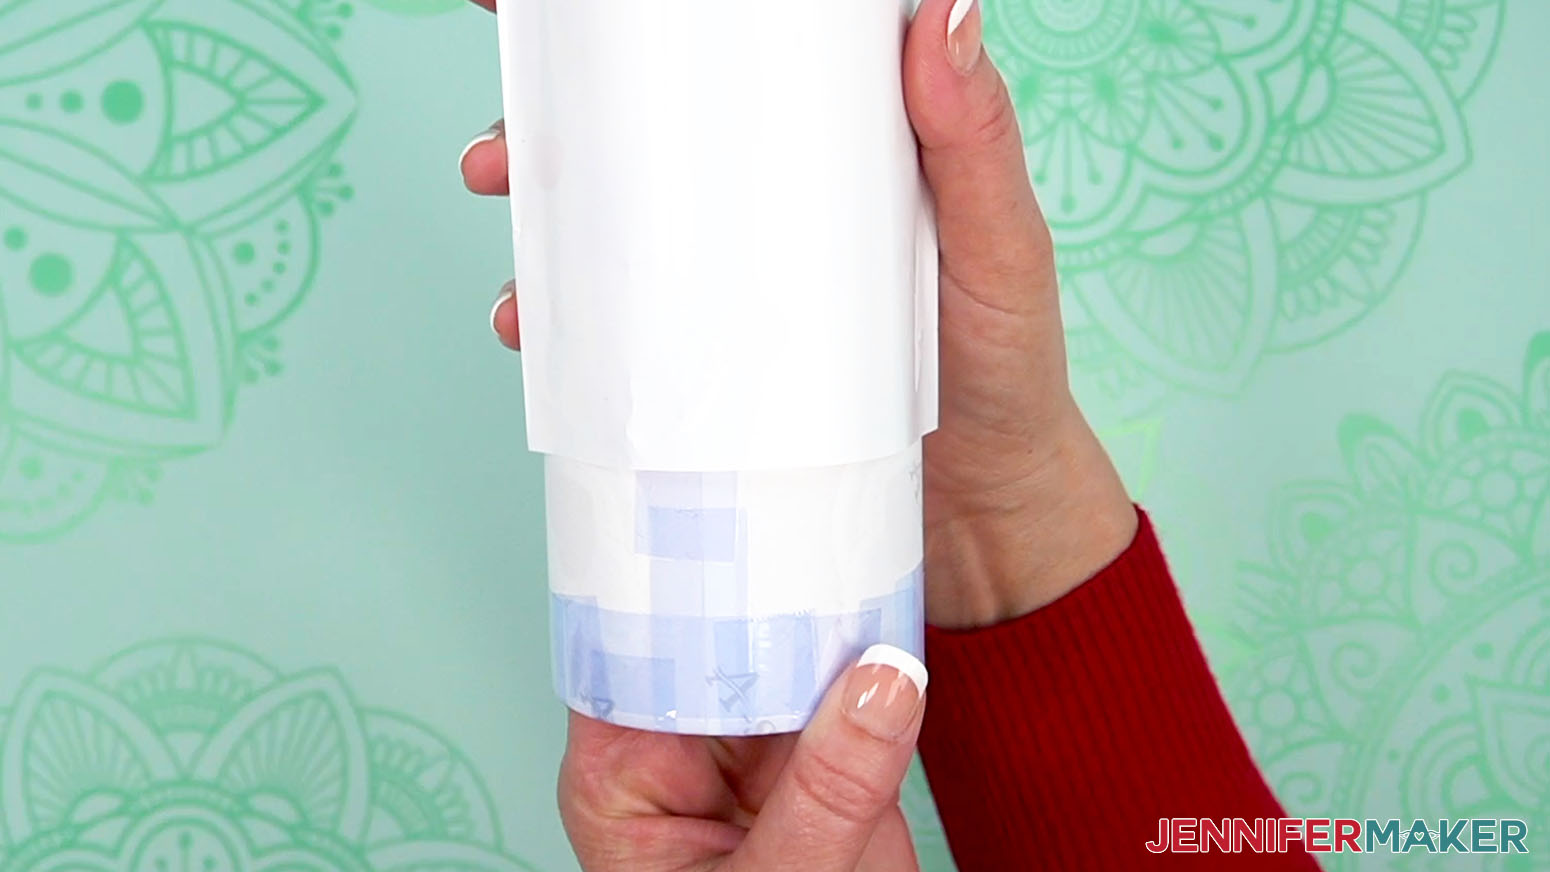 Place the shrink wrap over the taped tumbler design.